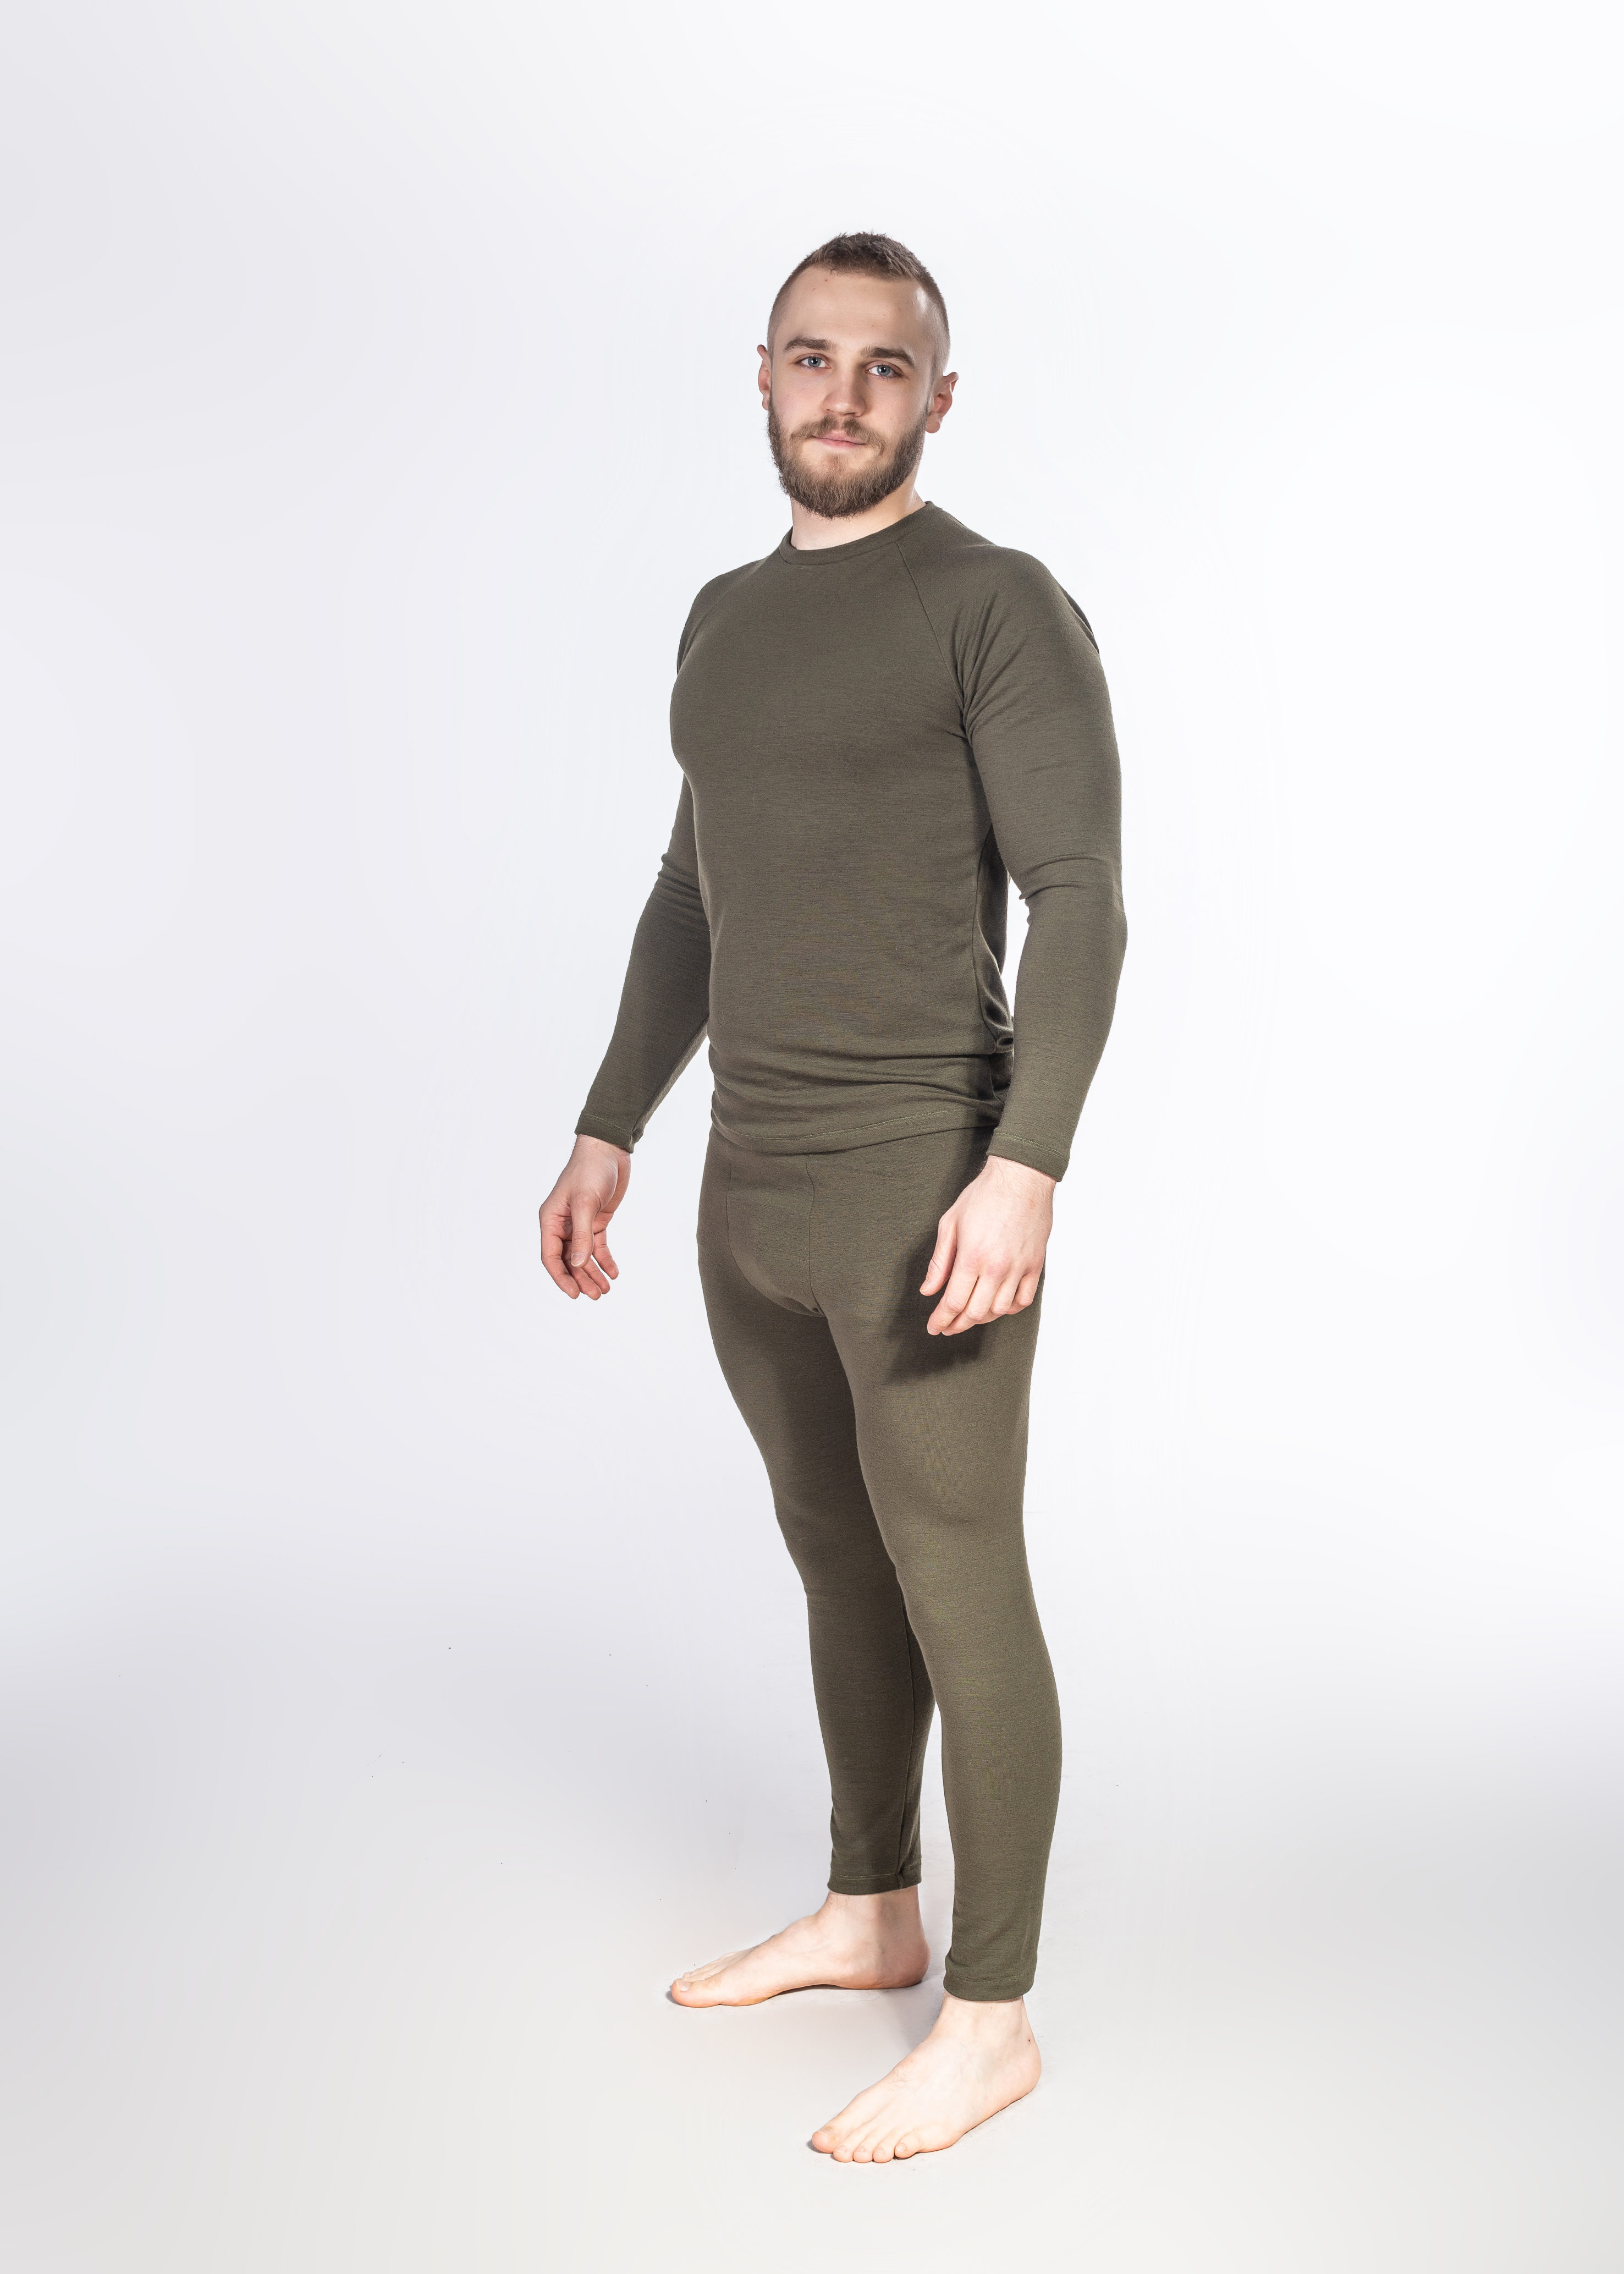 MERINO Thermal Underwear for Adults